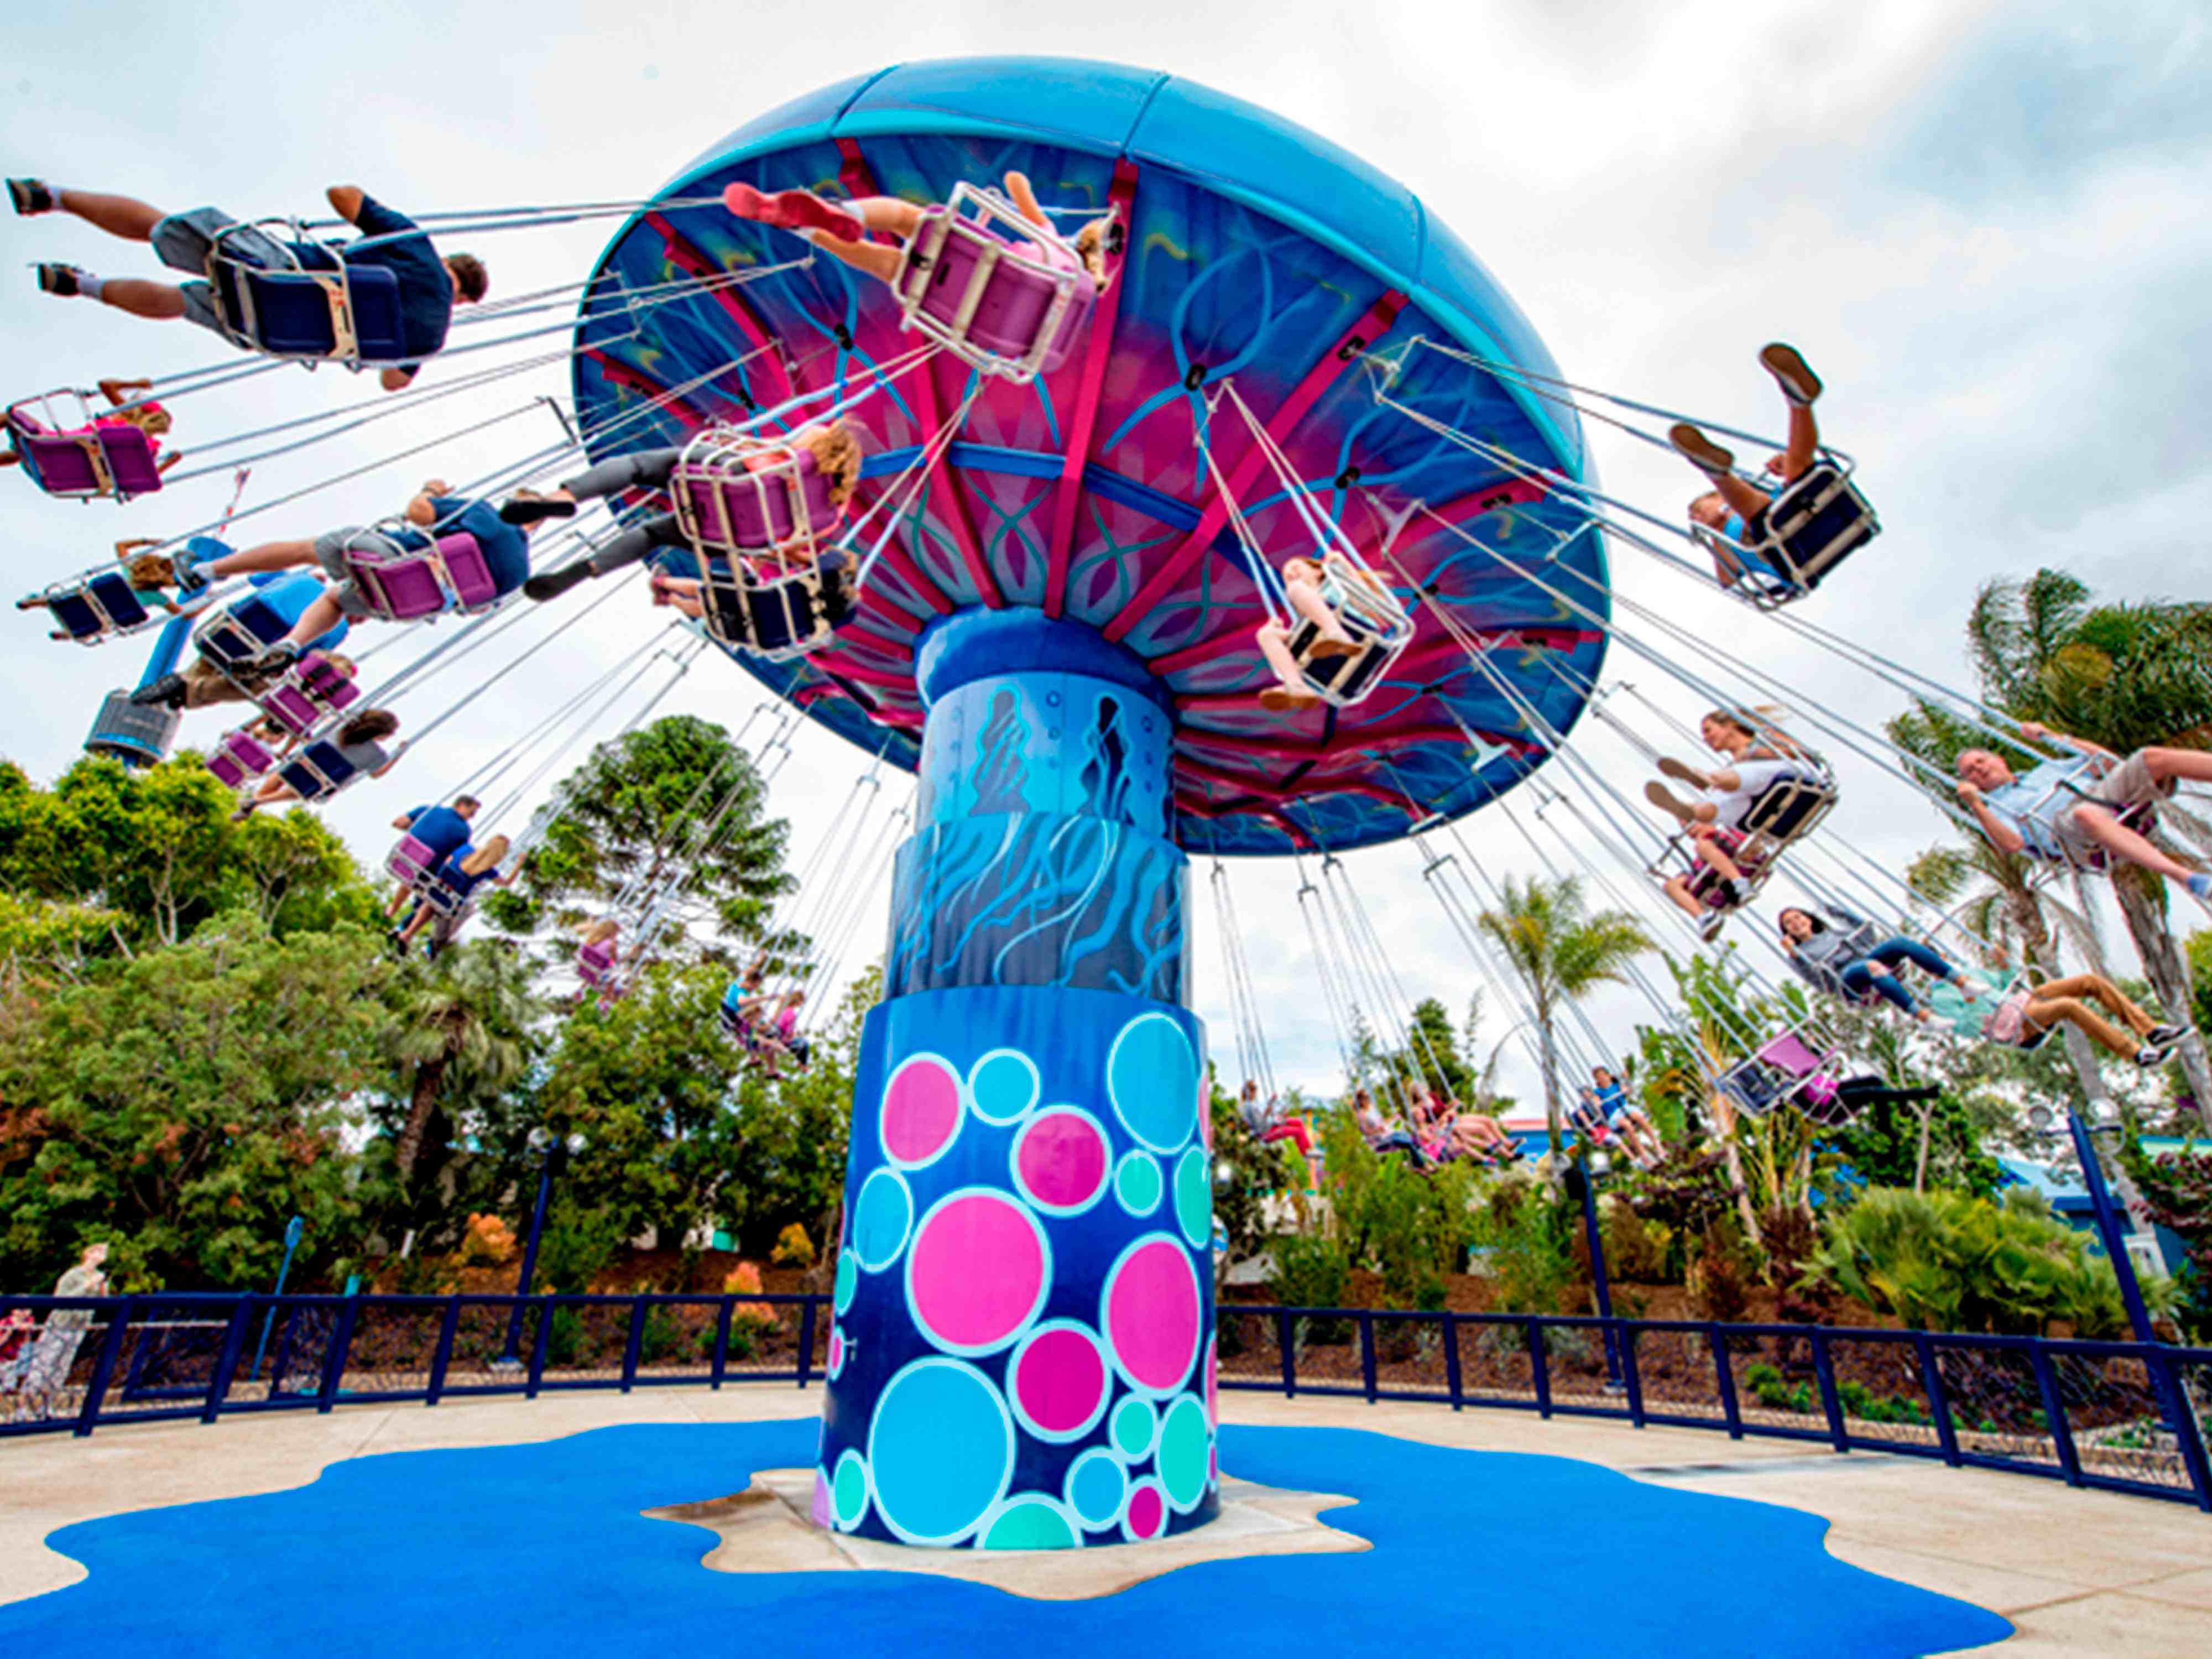 Check out the Tentacle Twirl at Sea World!